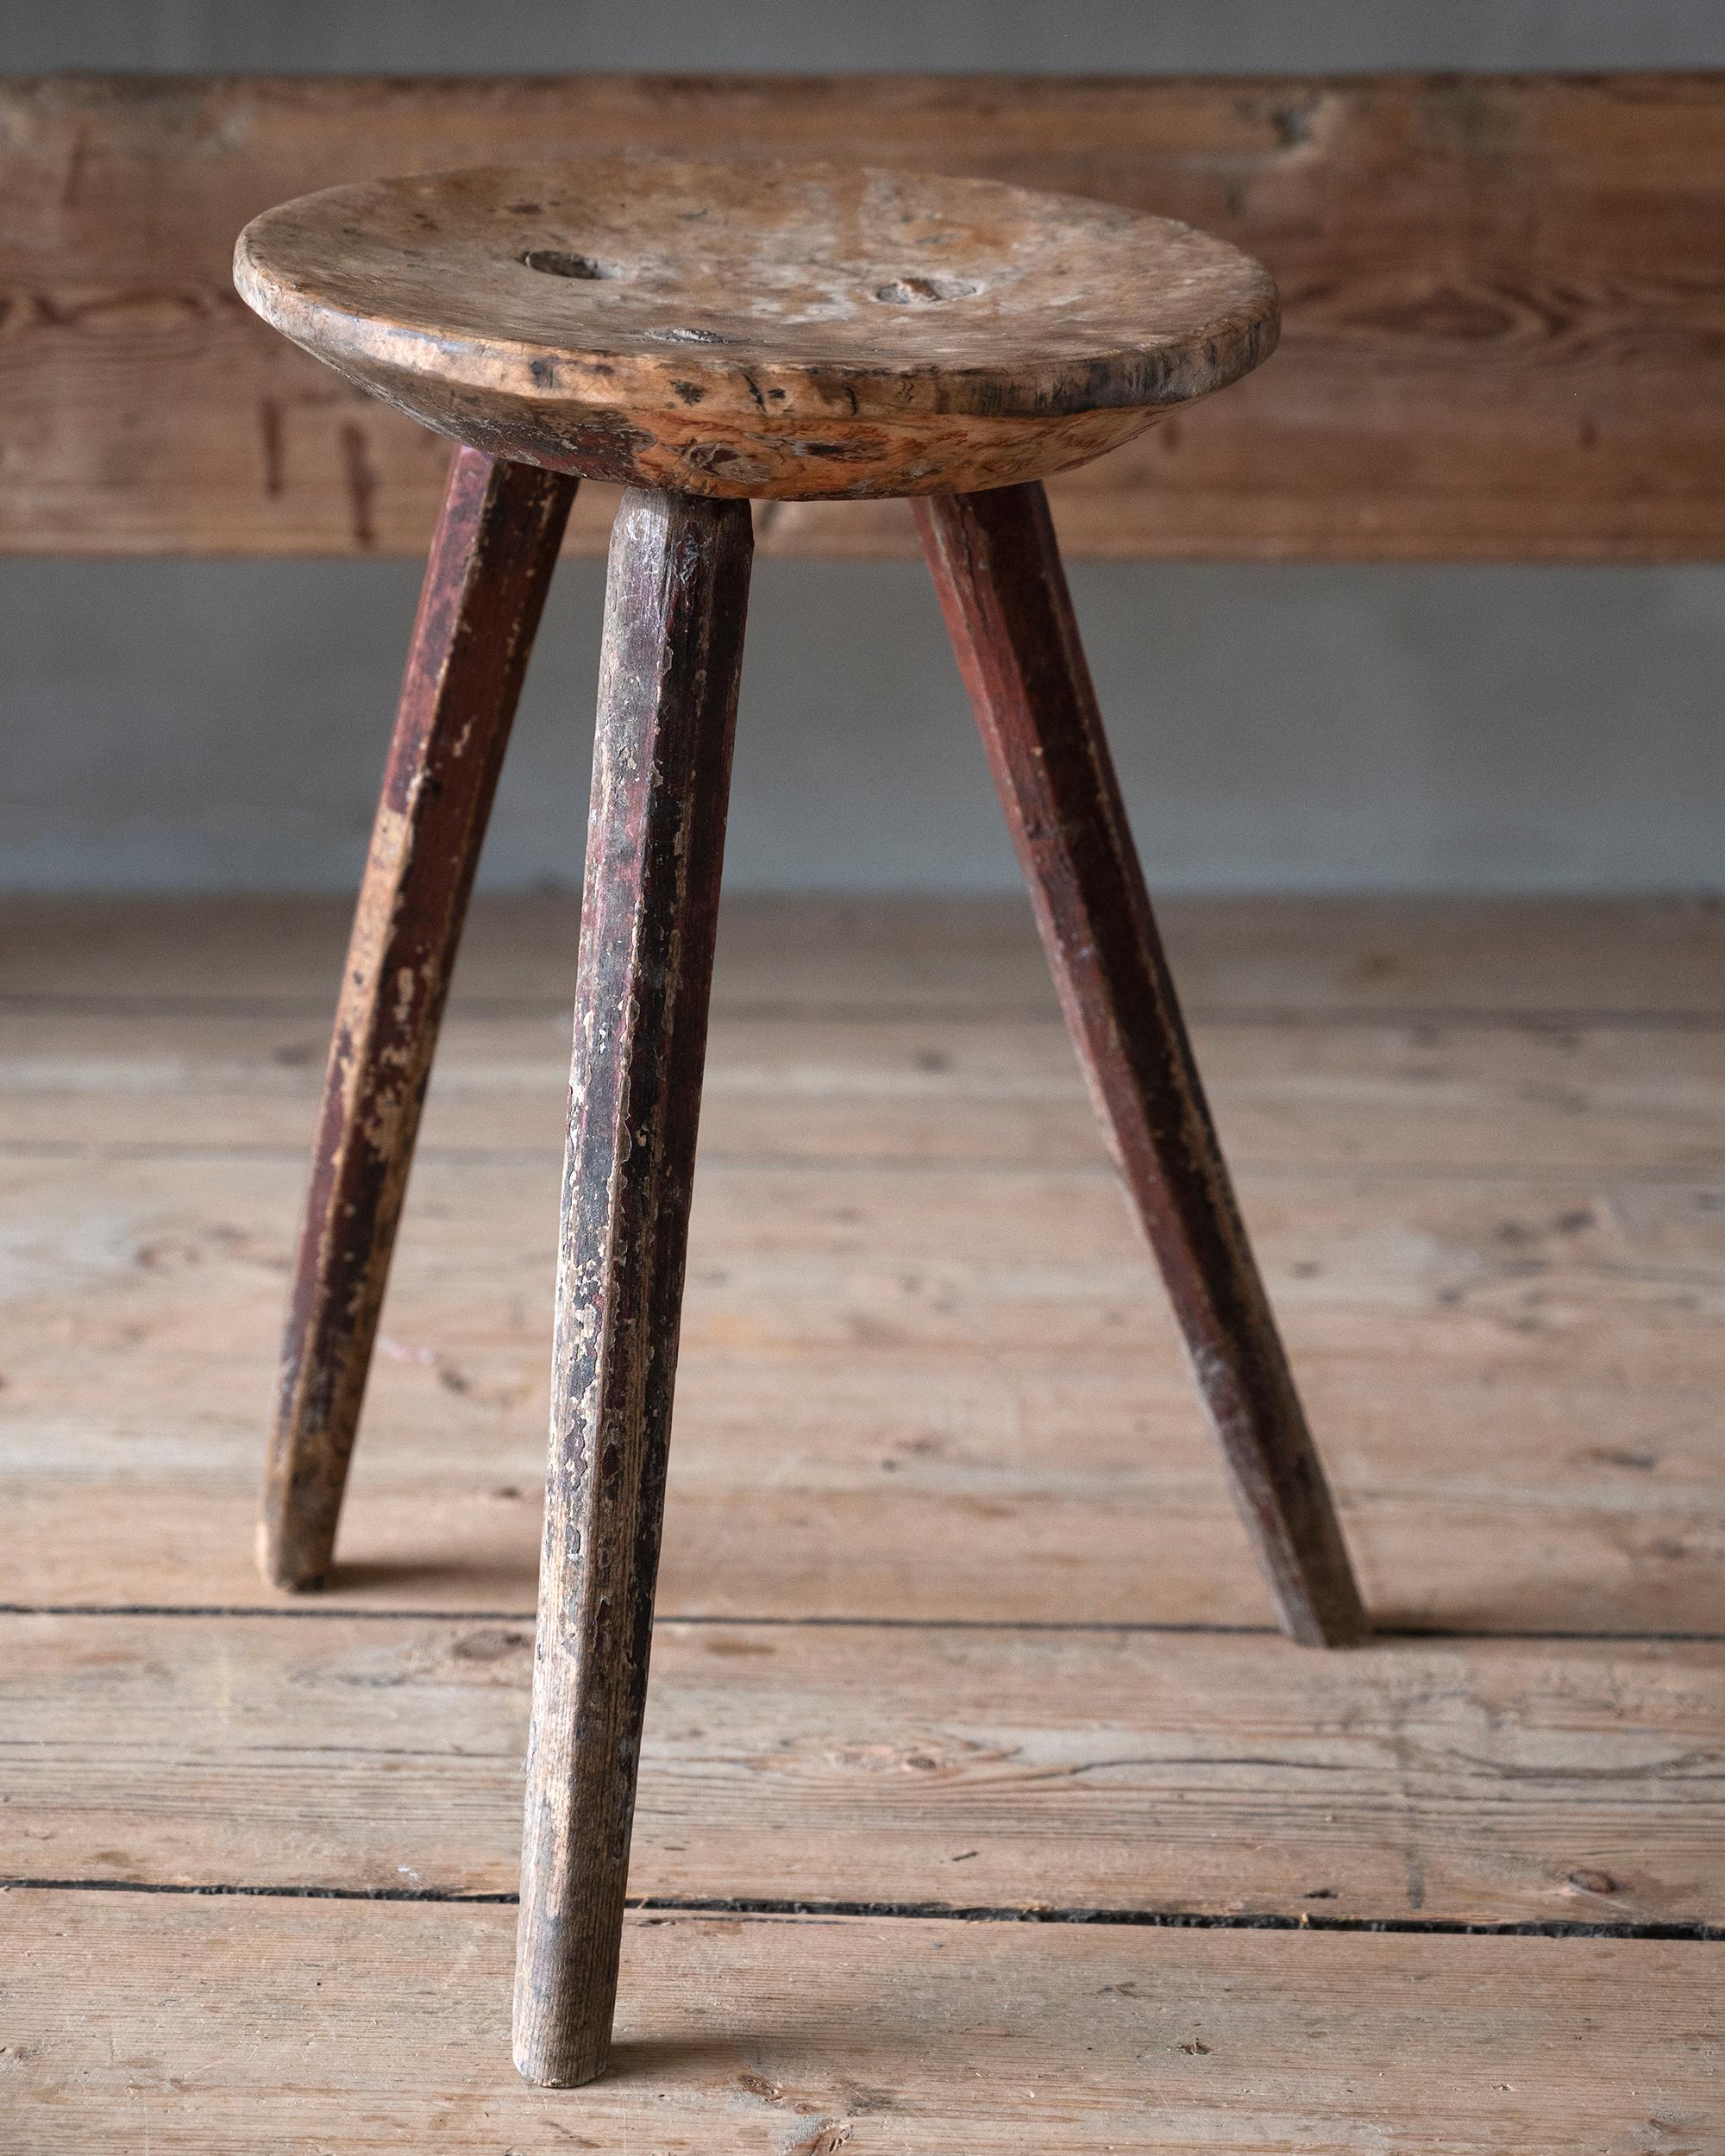 Charming 19th century Swedish folk art stool in Its original condition with great patina, ca 1810 Sweden. 